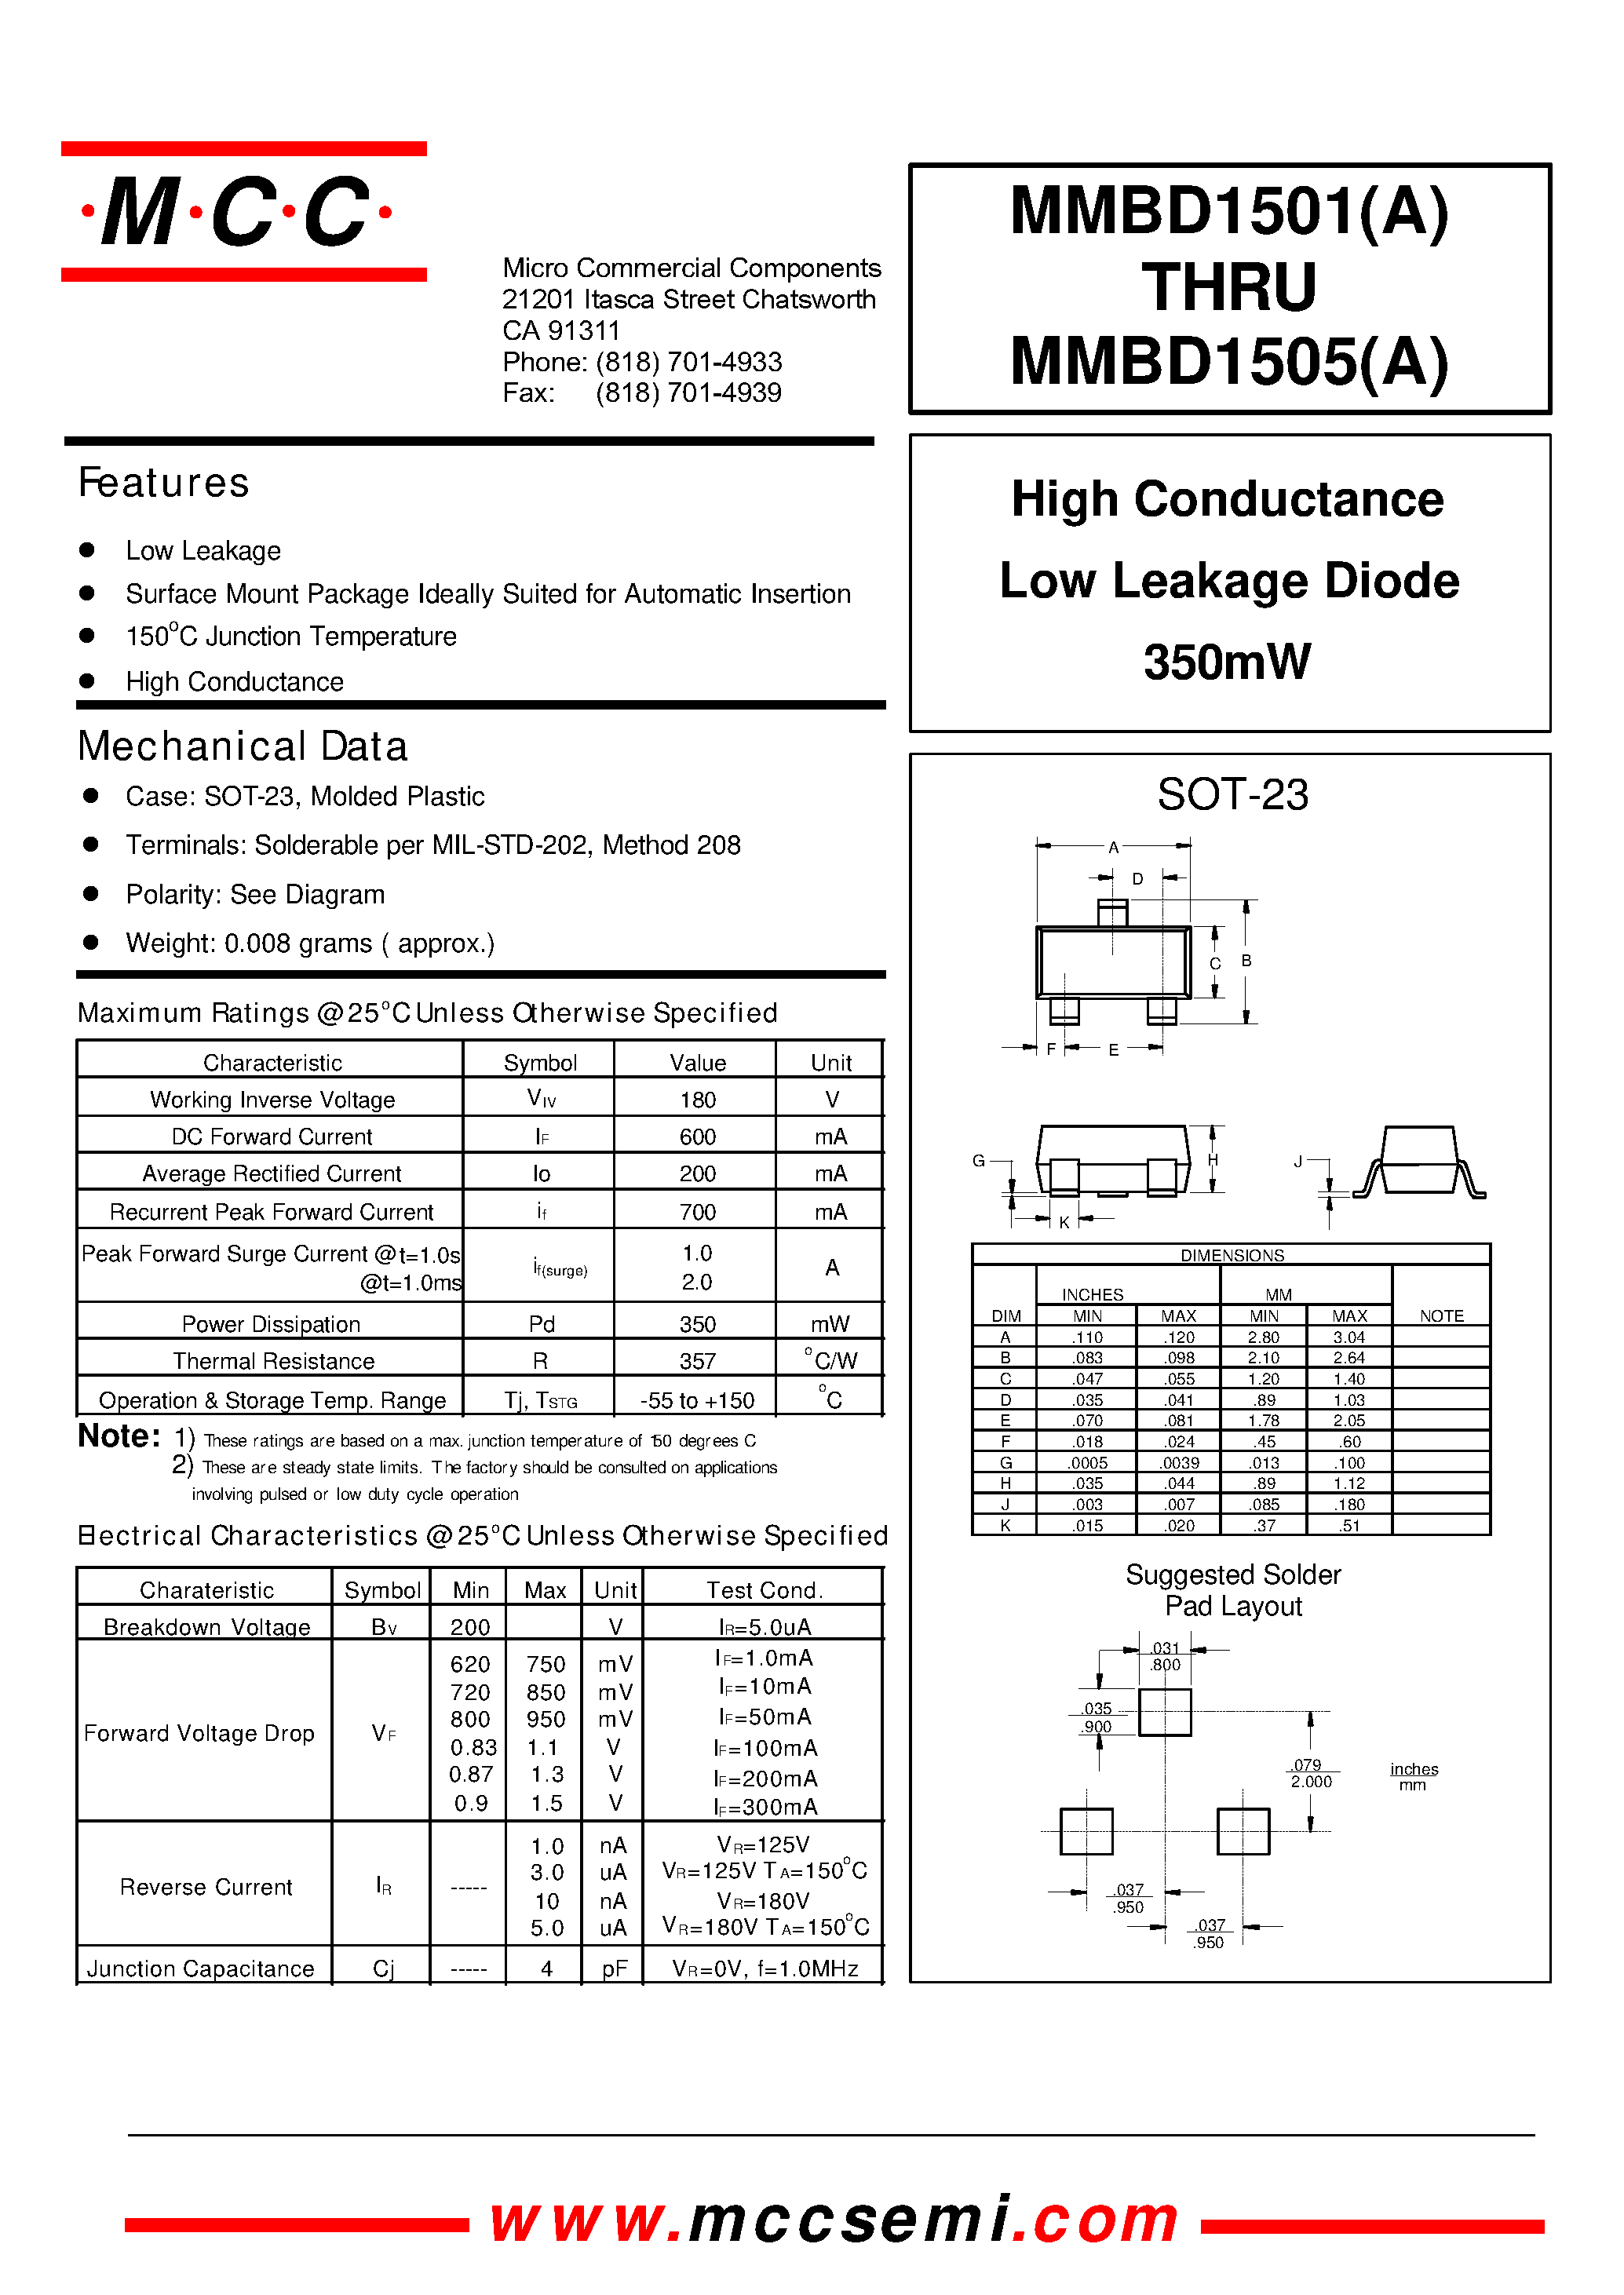 Datasheet MMBD1501A - High Conductance Low Leakage Diode 350mW page 1